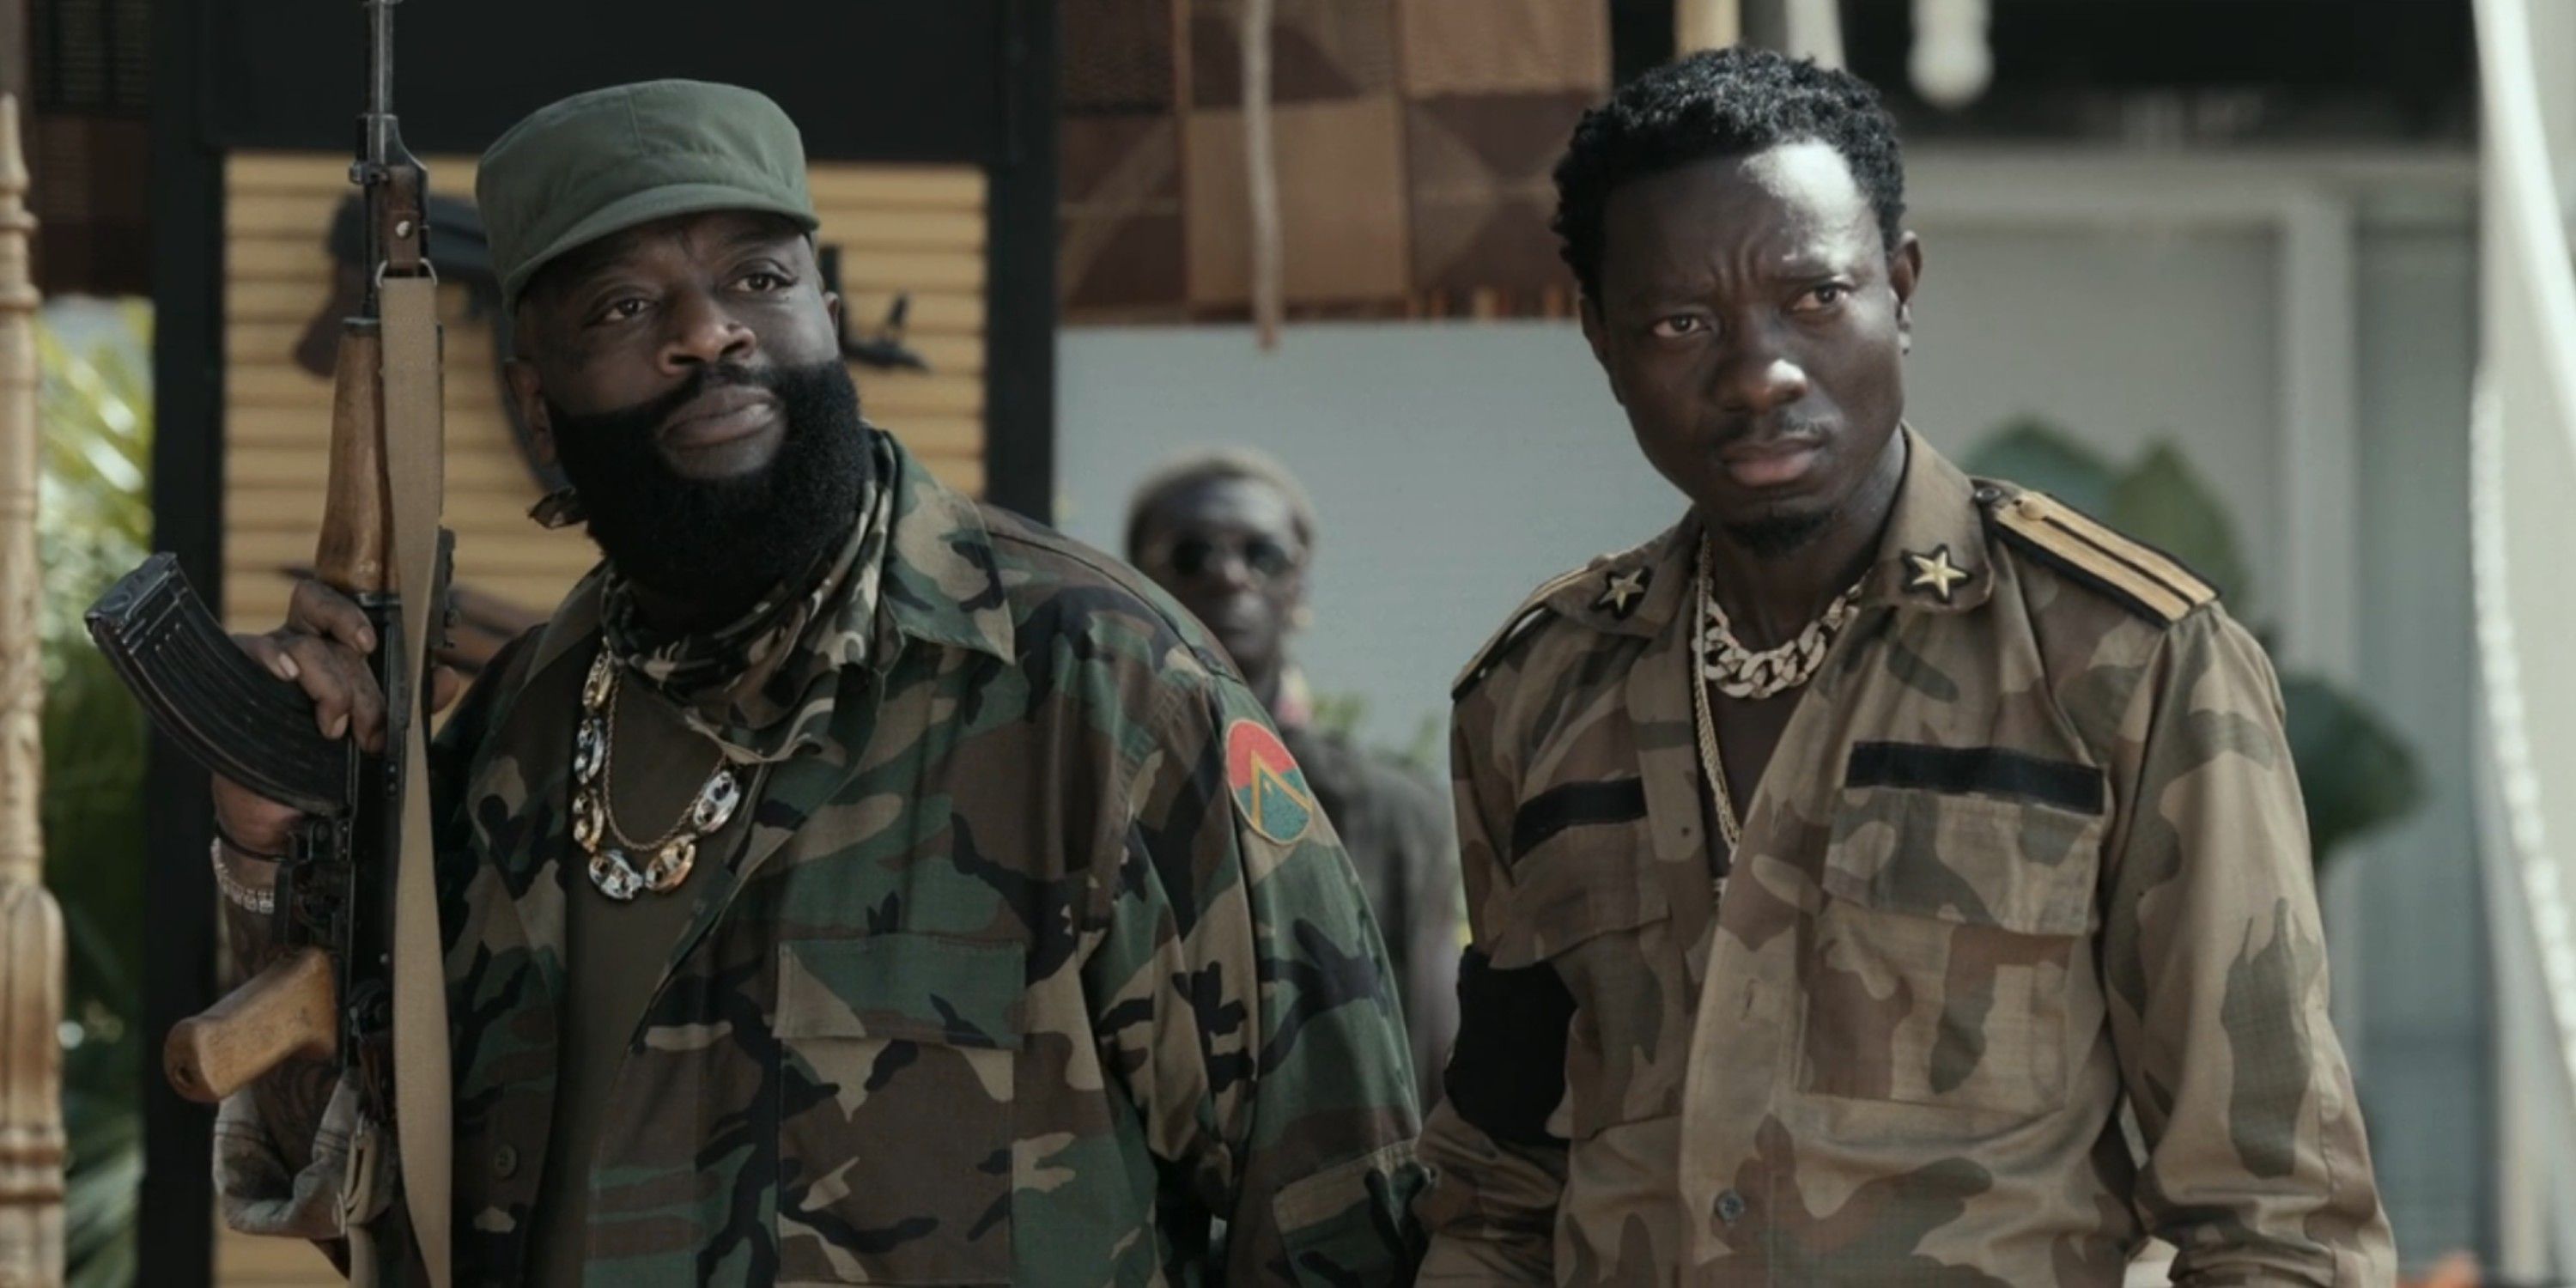 Rick Ross as General Izzi's Soldier and Michael Blackson as Izzi's Lieutenant in Coming 2 America on Amazon Prime